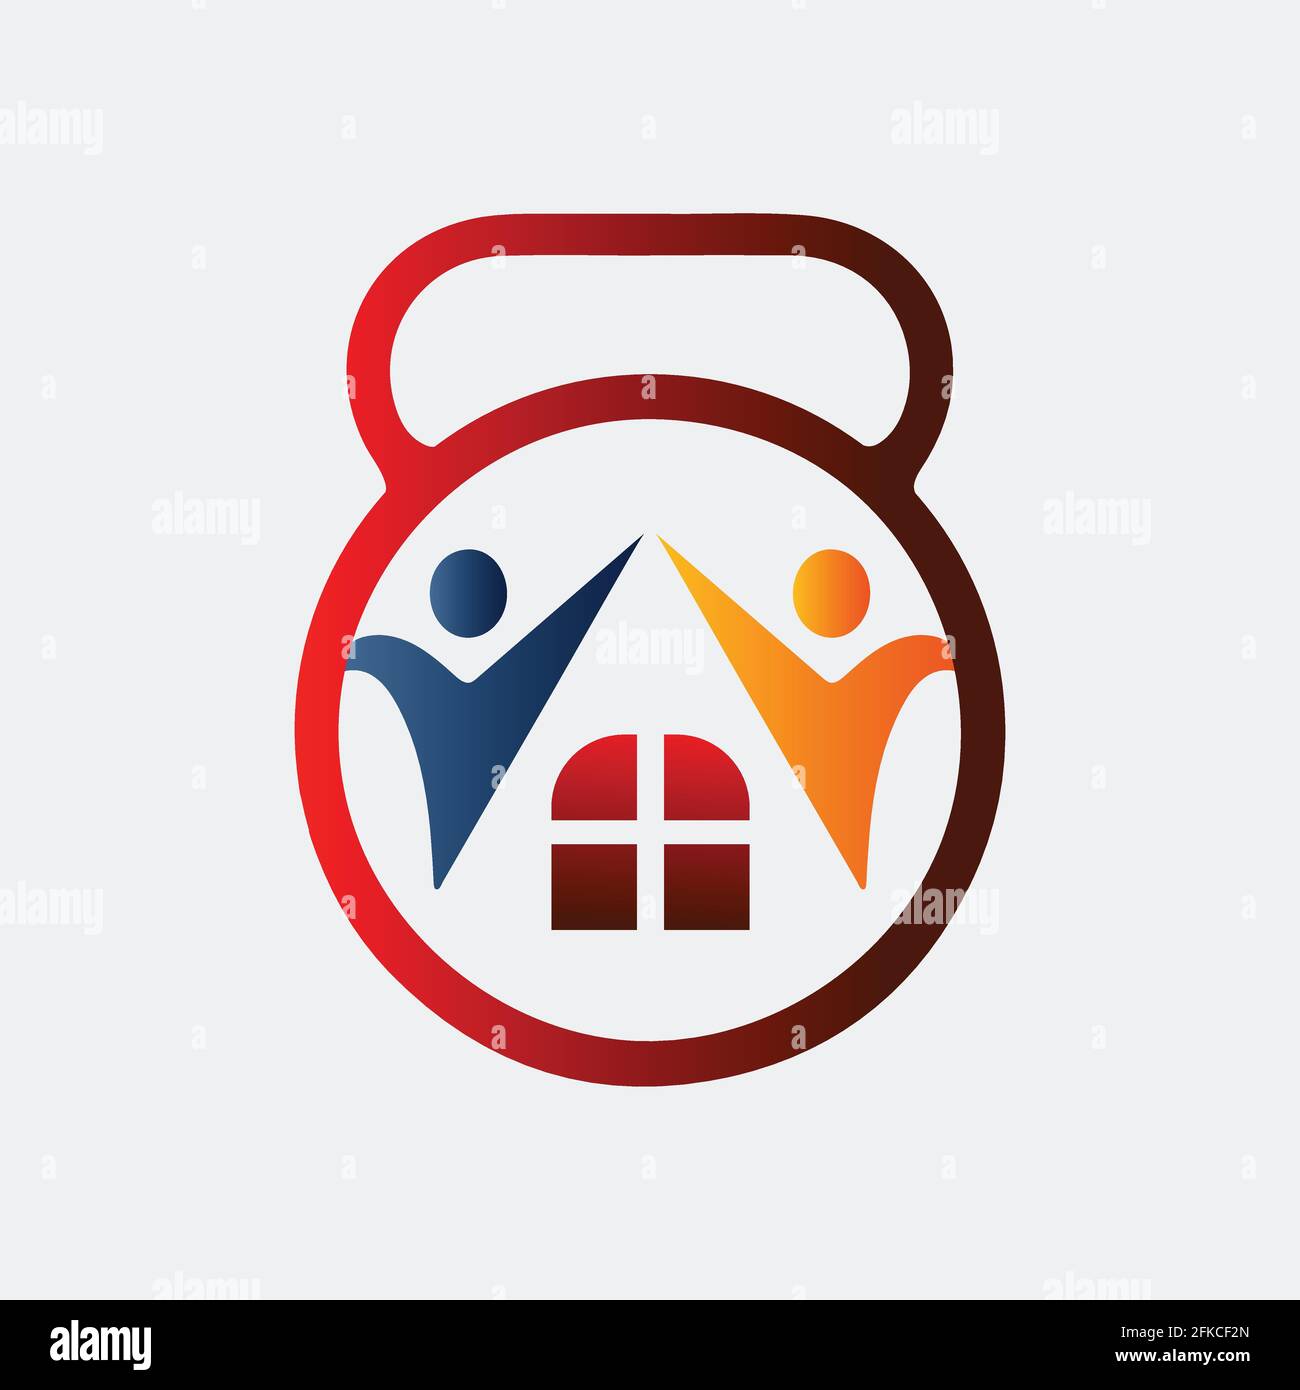 Home Care with fitness dumbbell icon vector logo design. Stock Vector